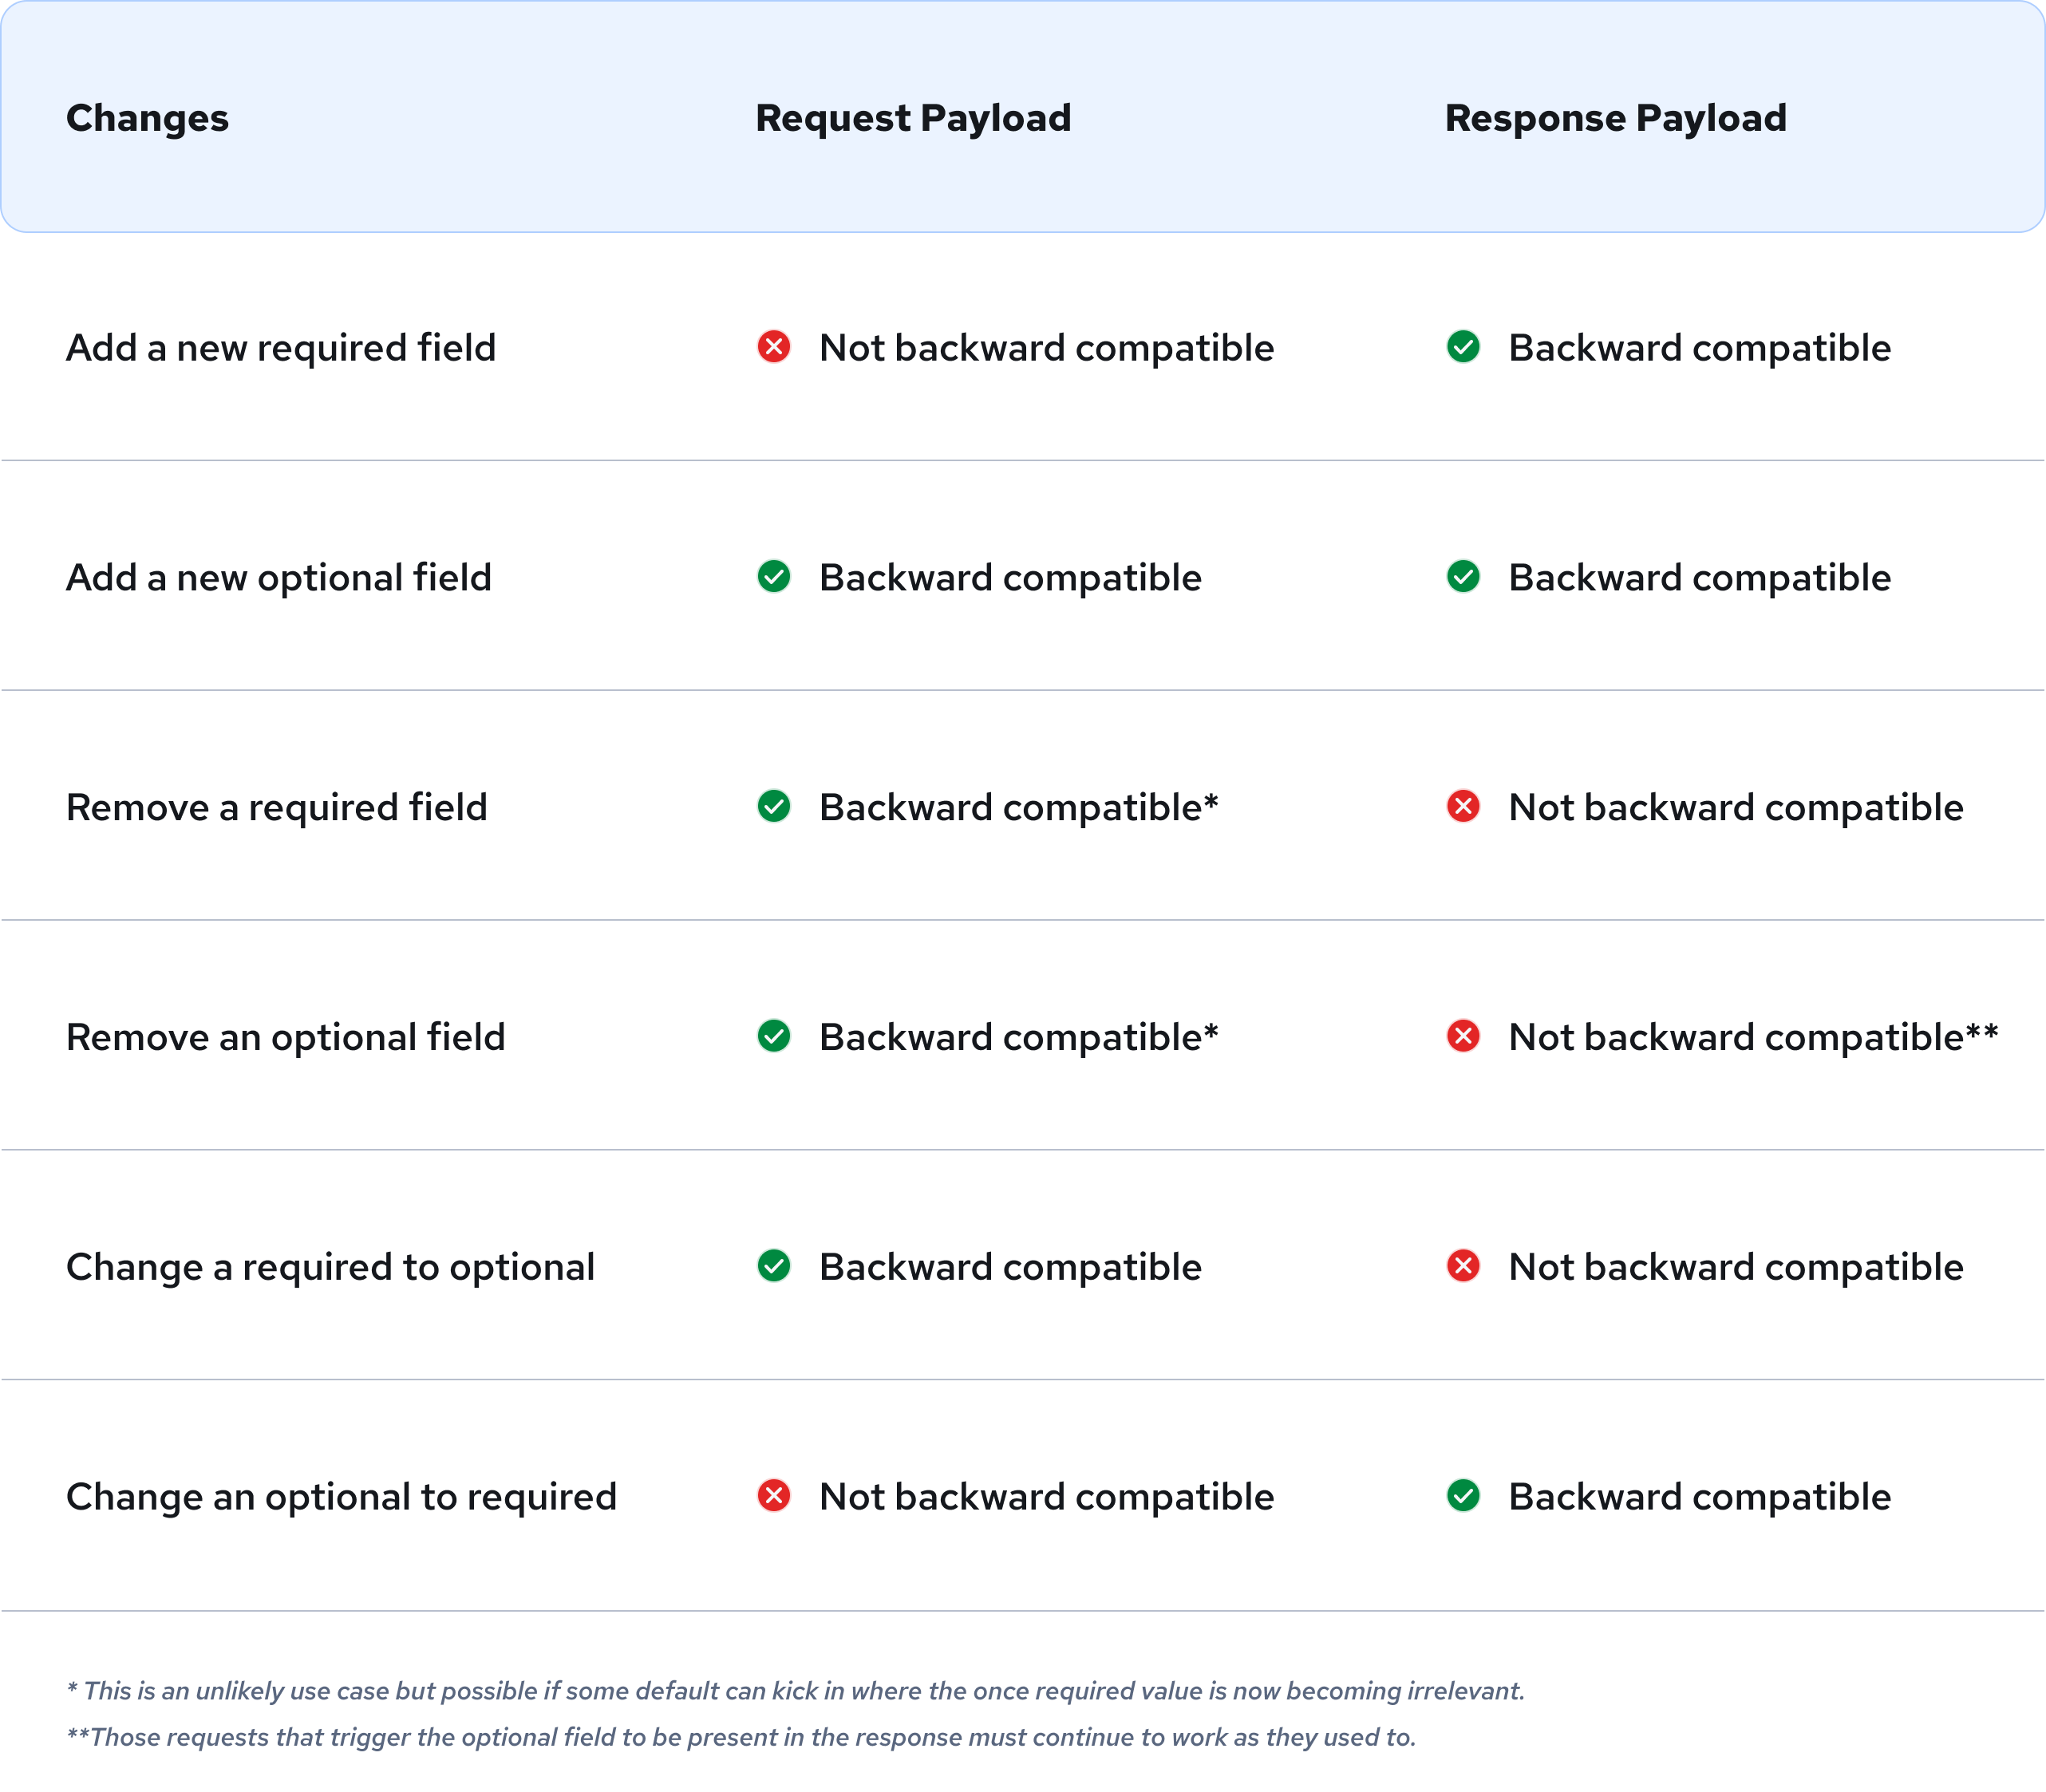 Table summarizing request and response payloads for ensuring backward compatibility in a minor version upgrade